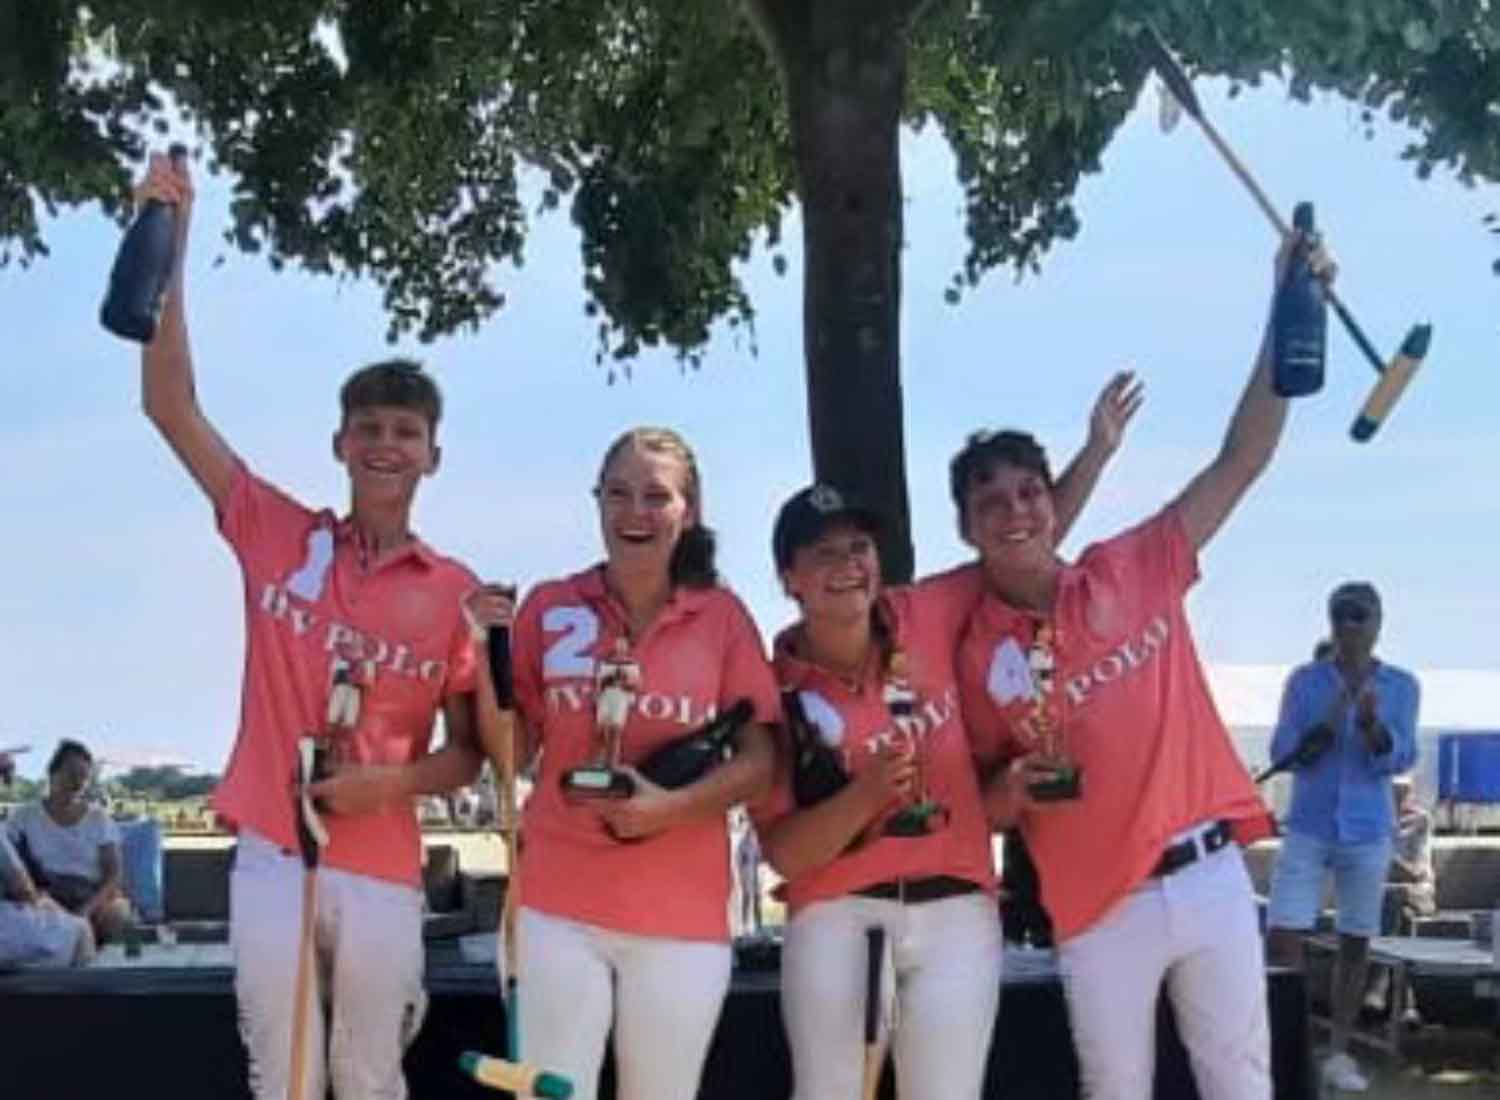 The NK POLO 2022 0 goal has been won by the HV POLO team with Lucas and Bastiaan de Jong and Cristina and Isabel Hoedemakers !